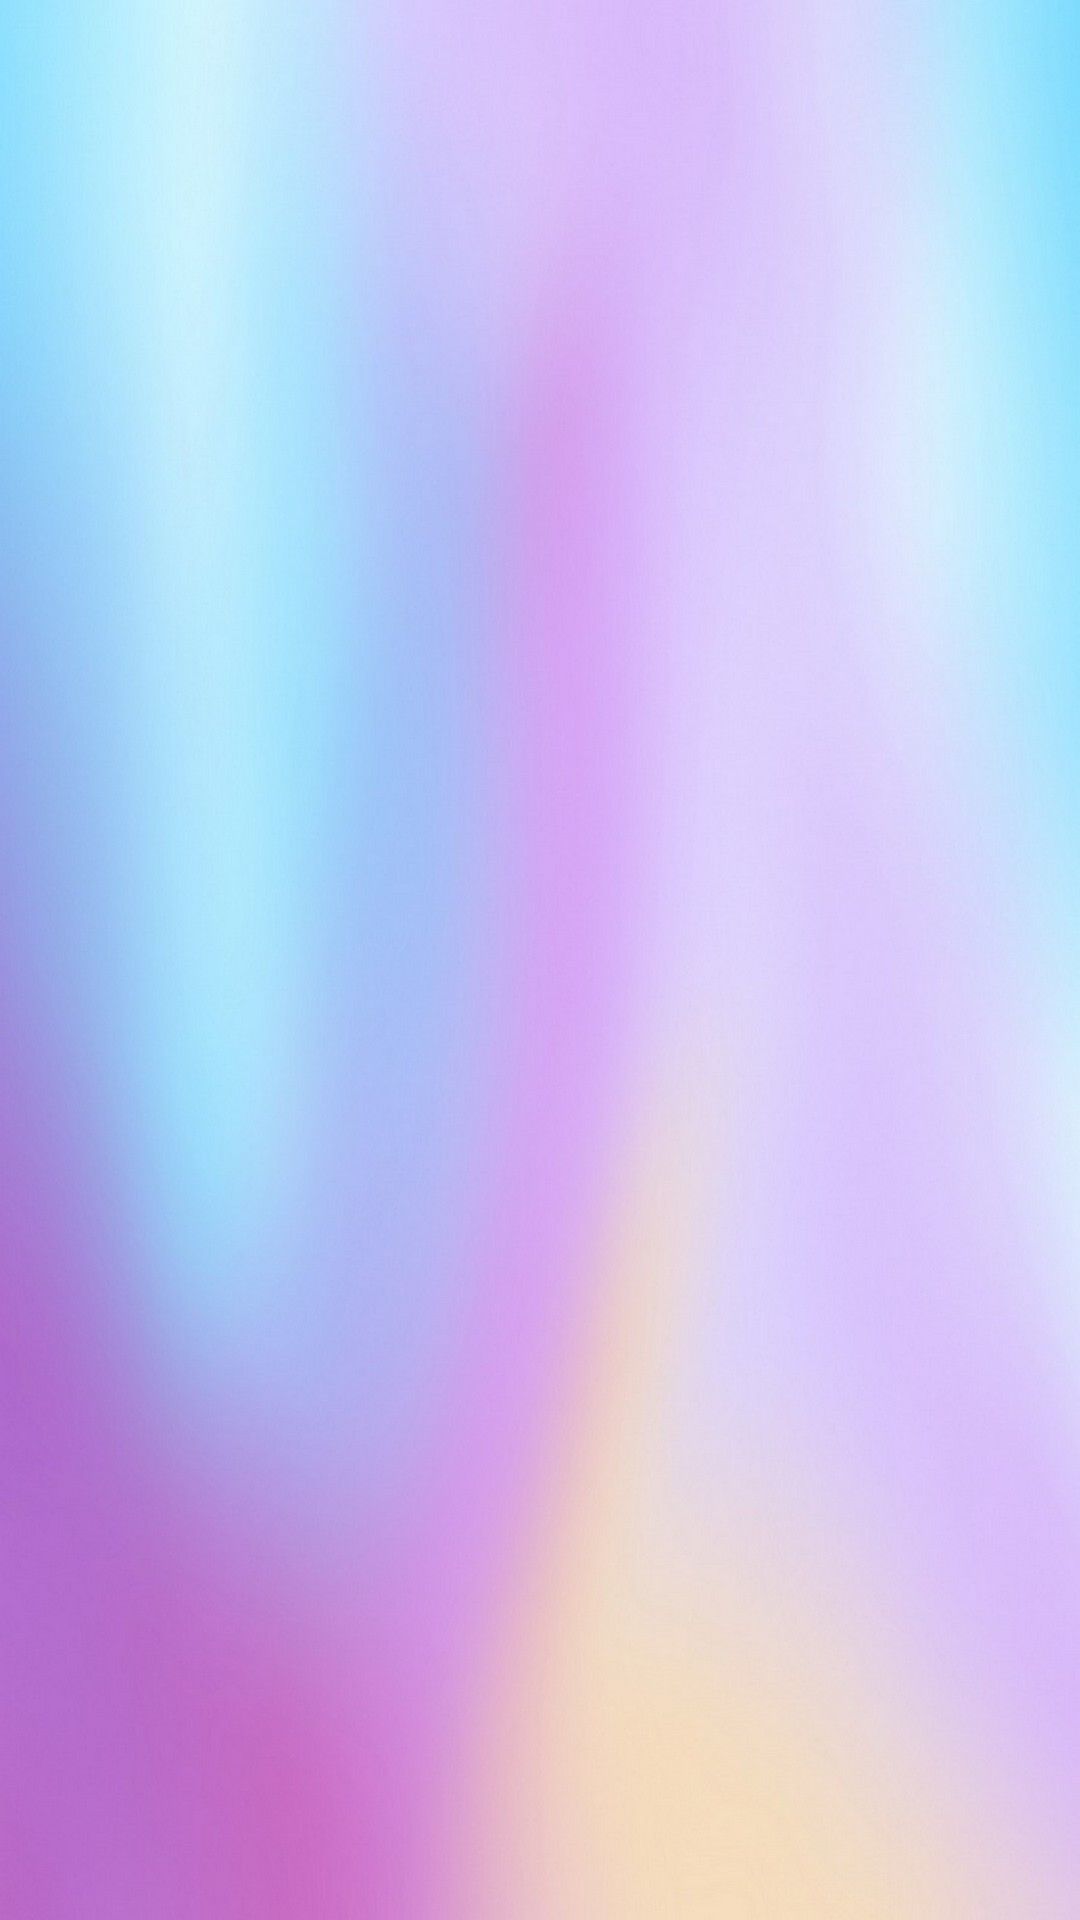 Dark Blue Gradient Android Wallpapers - Wallpaper Cave